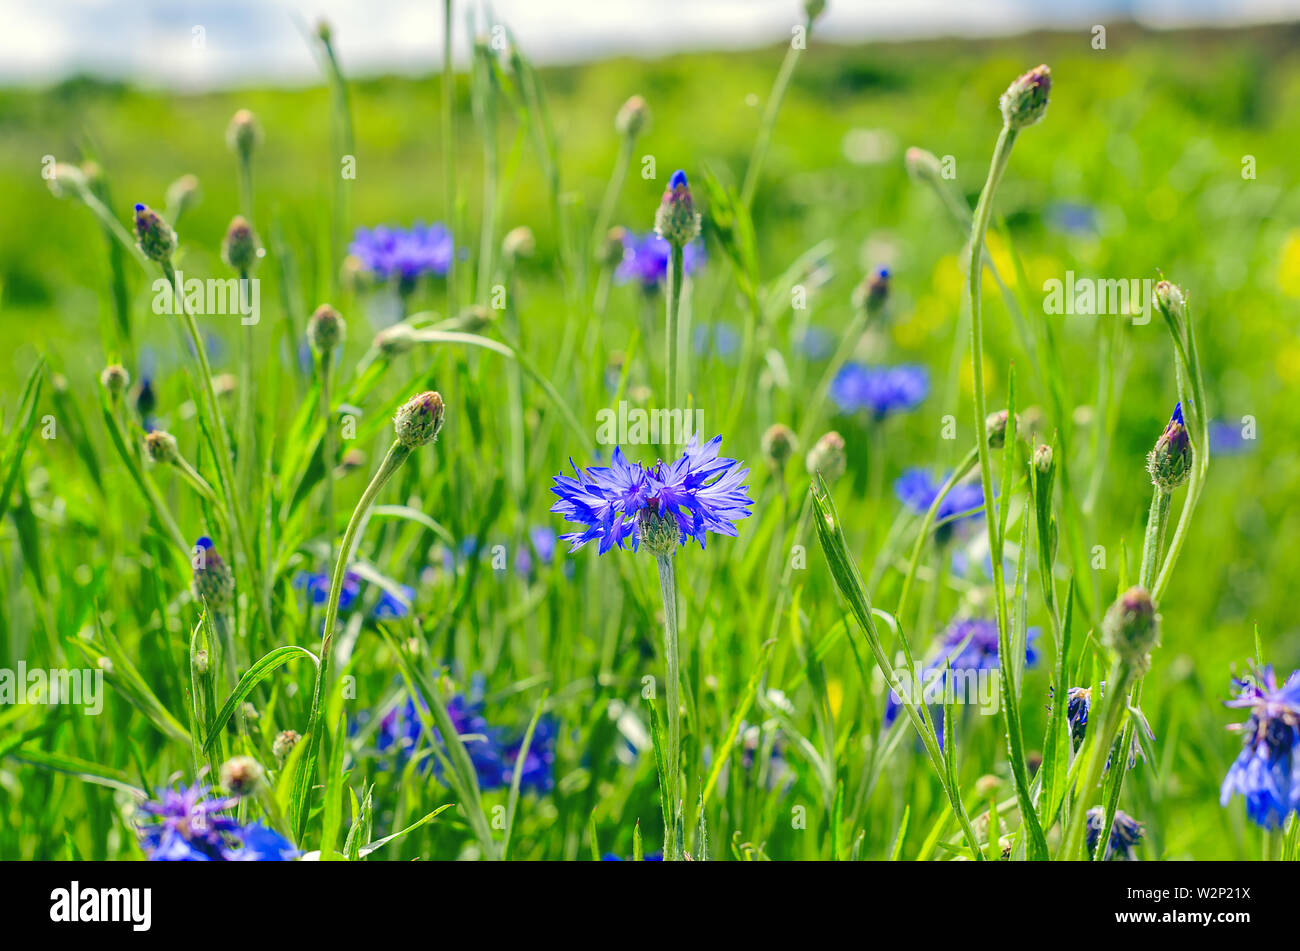 Blue Cornflowers, also called Bachelor's Buttons in the Field on a Bright Summer Day. Stock Photo